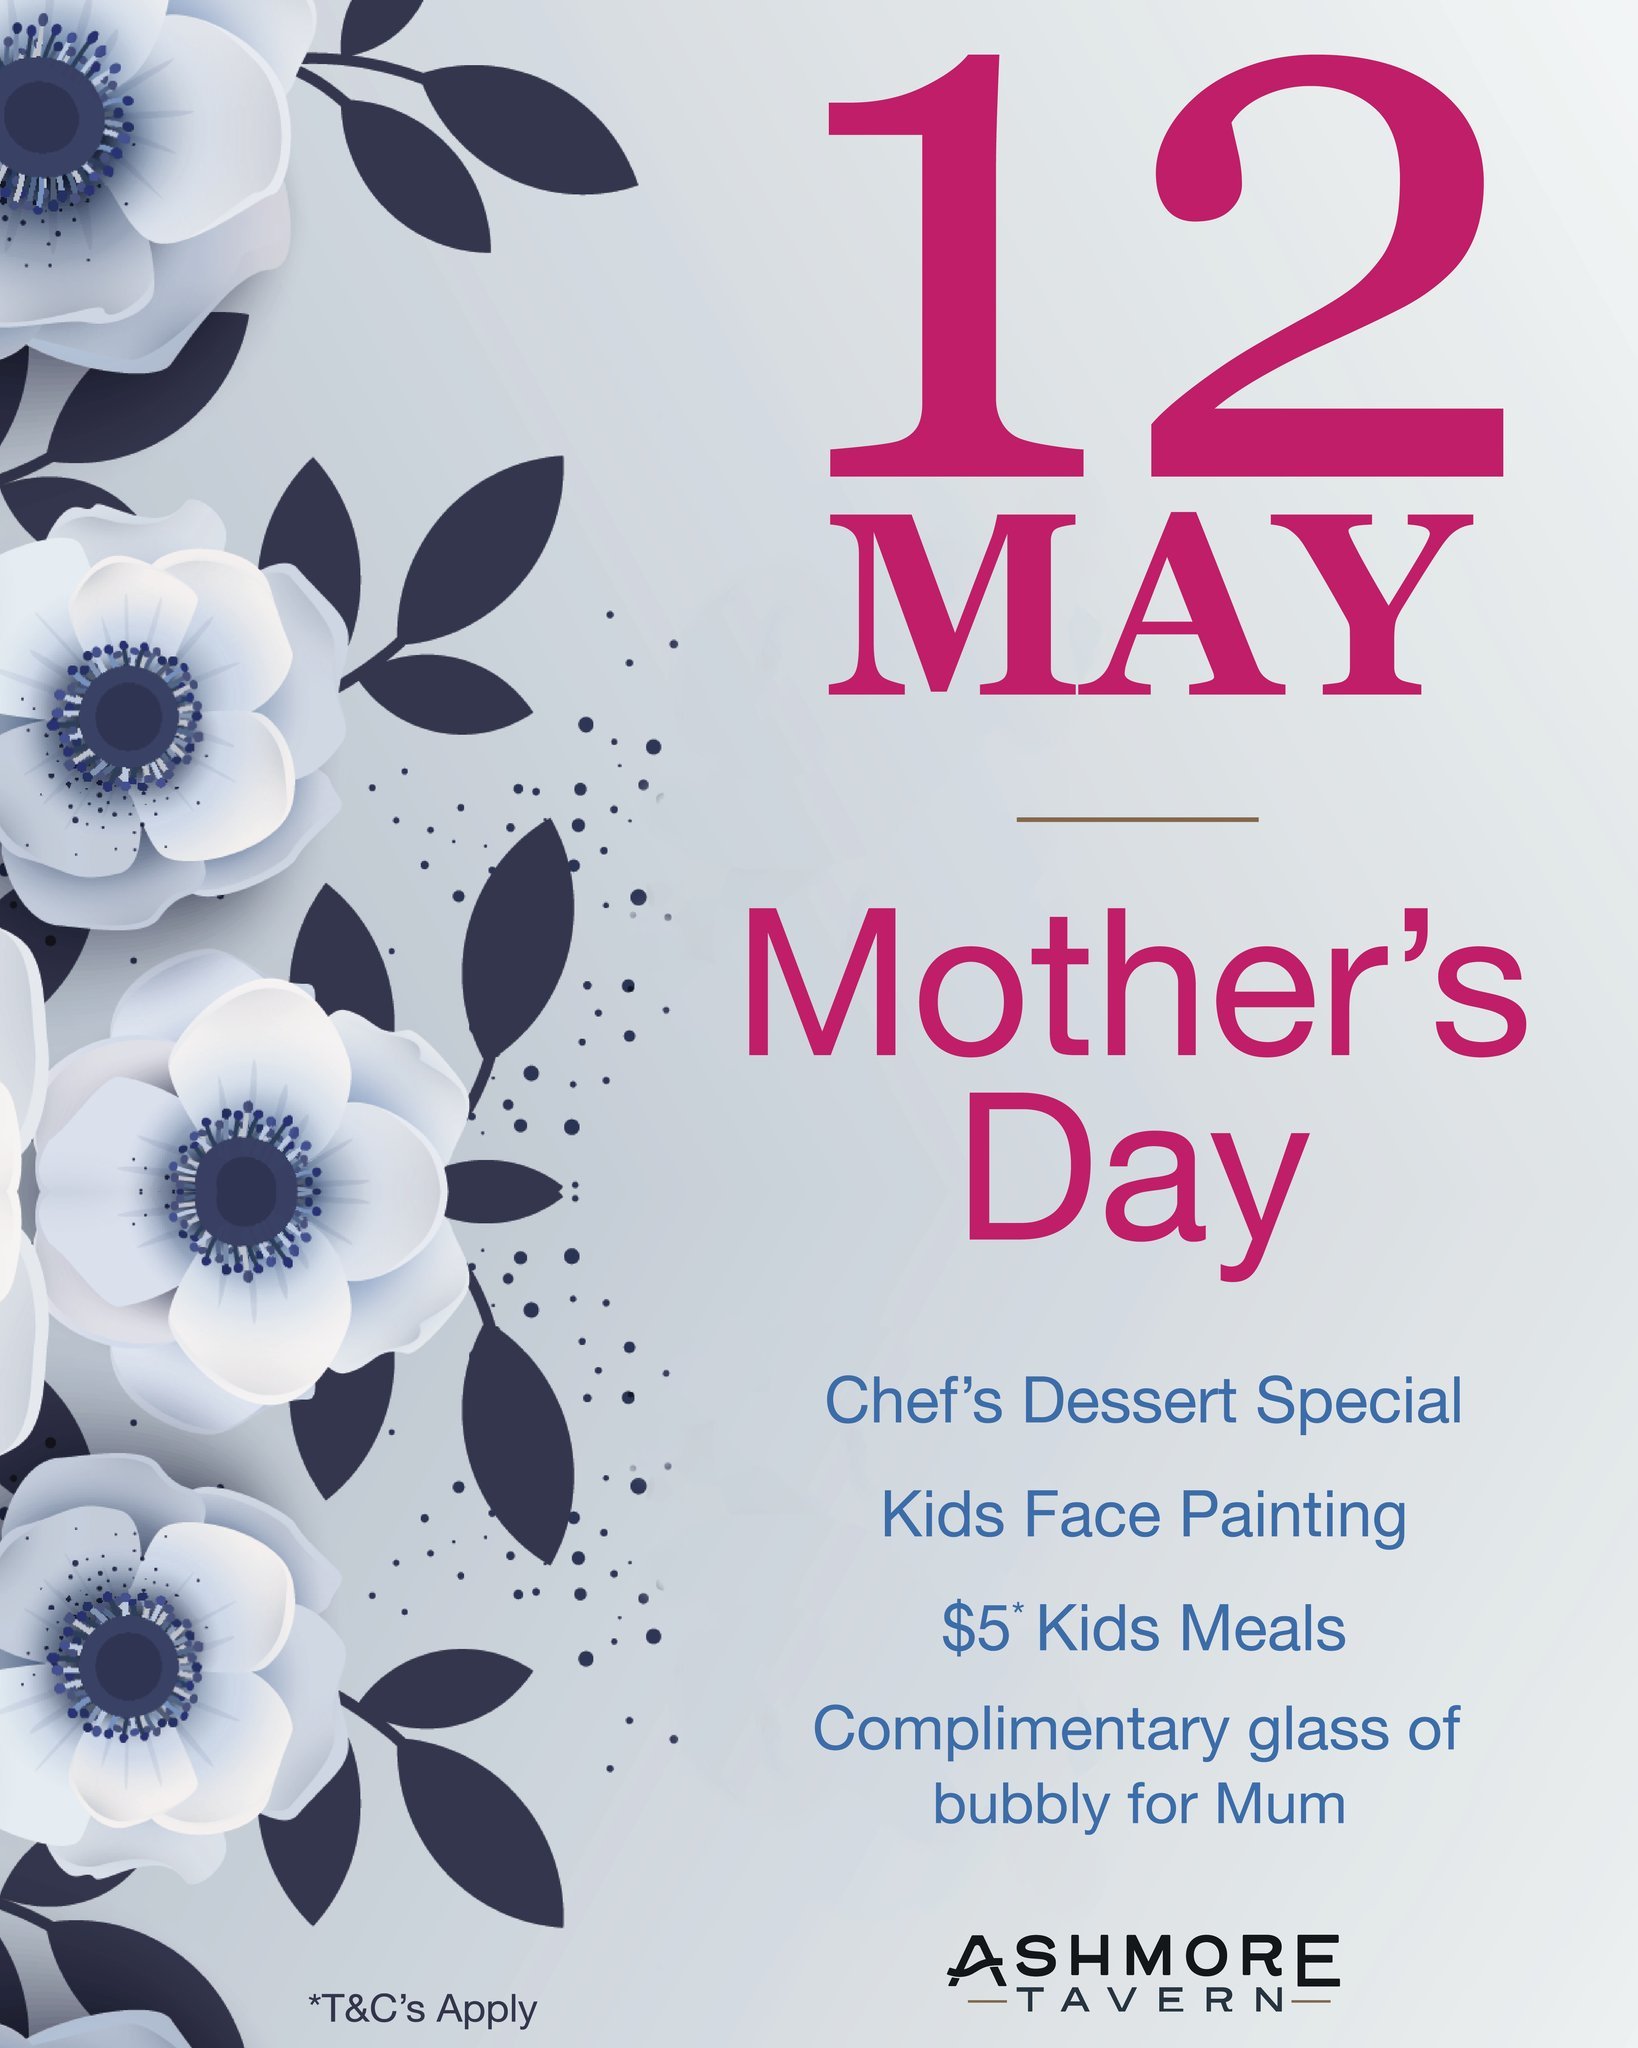 🌸✨ Treat Mum to a memorable Mother's Day at Ashmore Tavern!
 
Indulge in our Chef&rsquo;s dessert special, while the kids enjoy face painting and $5* Kids Meals. PLUS, Mum receives a complimentary glass of bubbly to top off her special day! 

Don't 